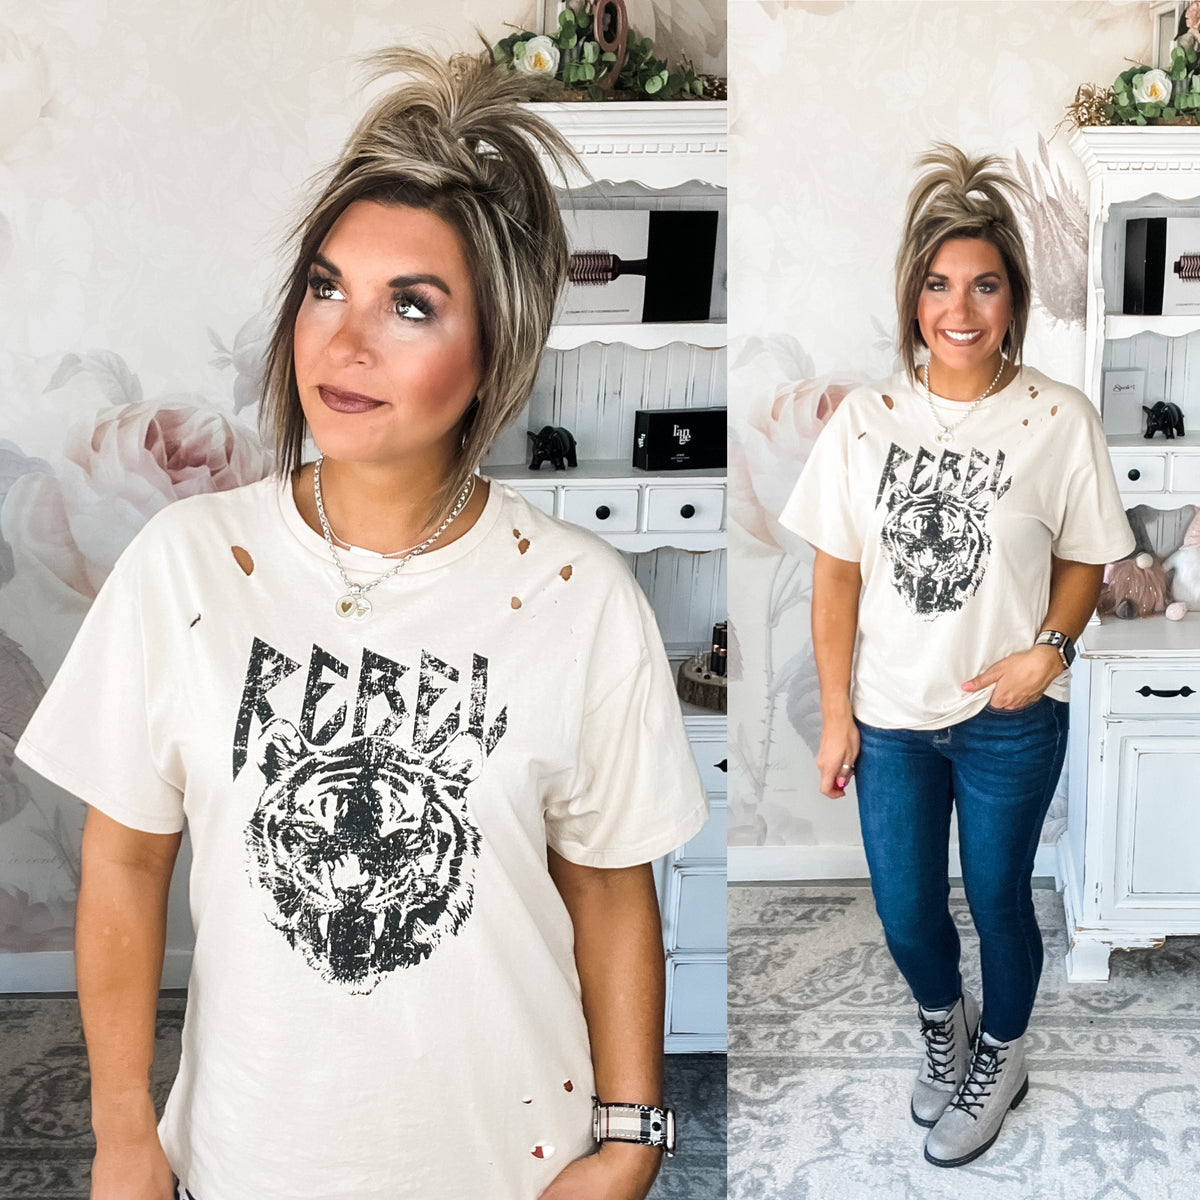 Rebel Distressed Graphic Tee